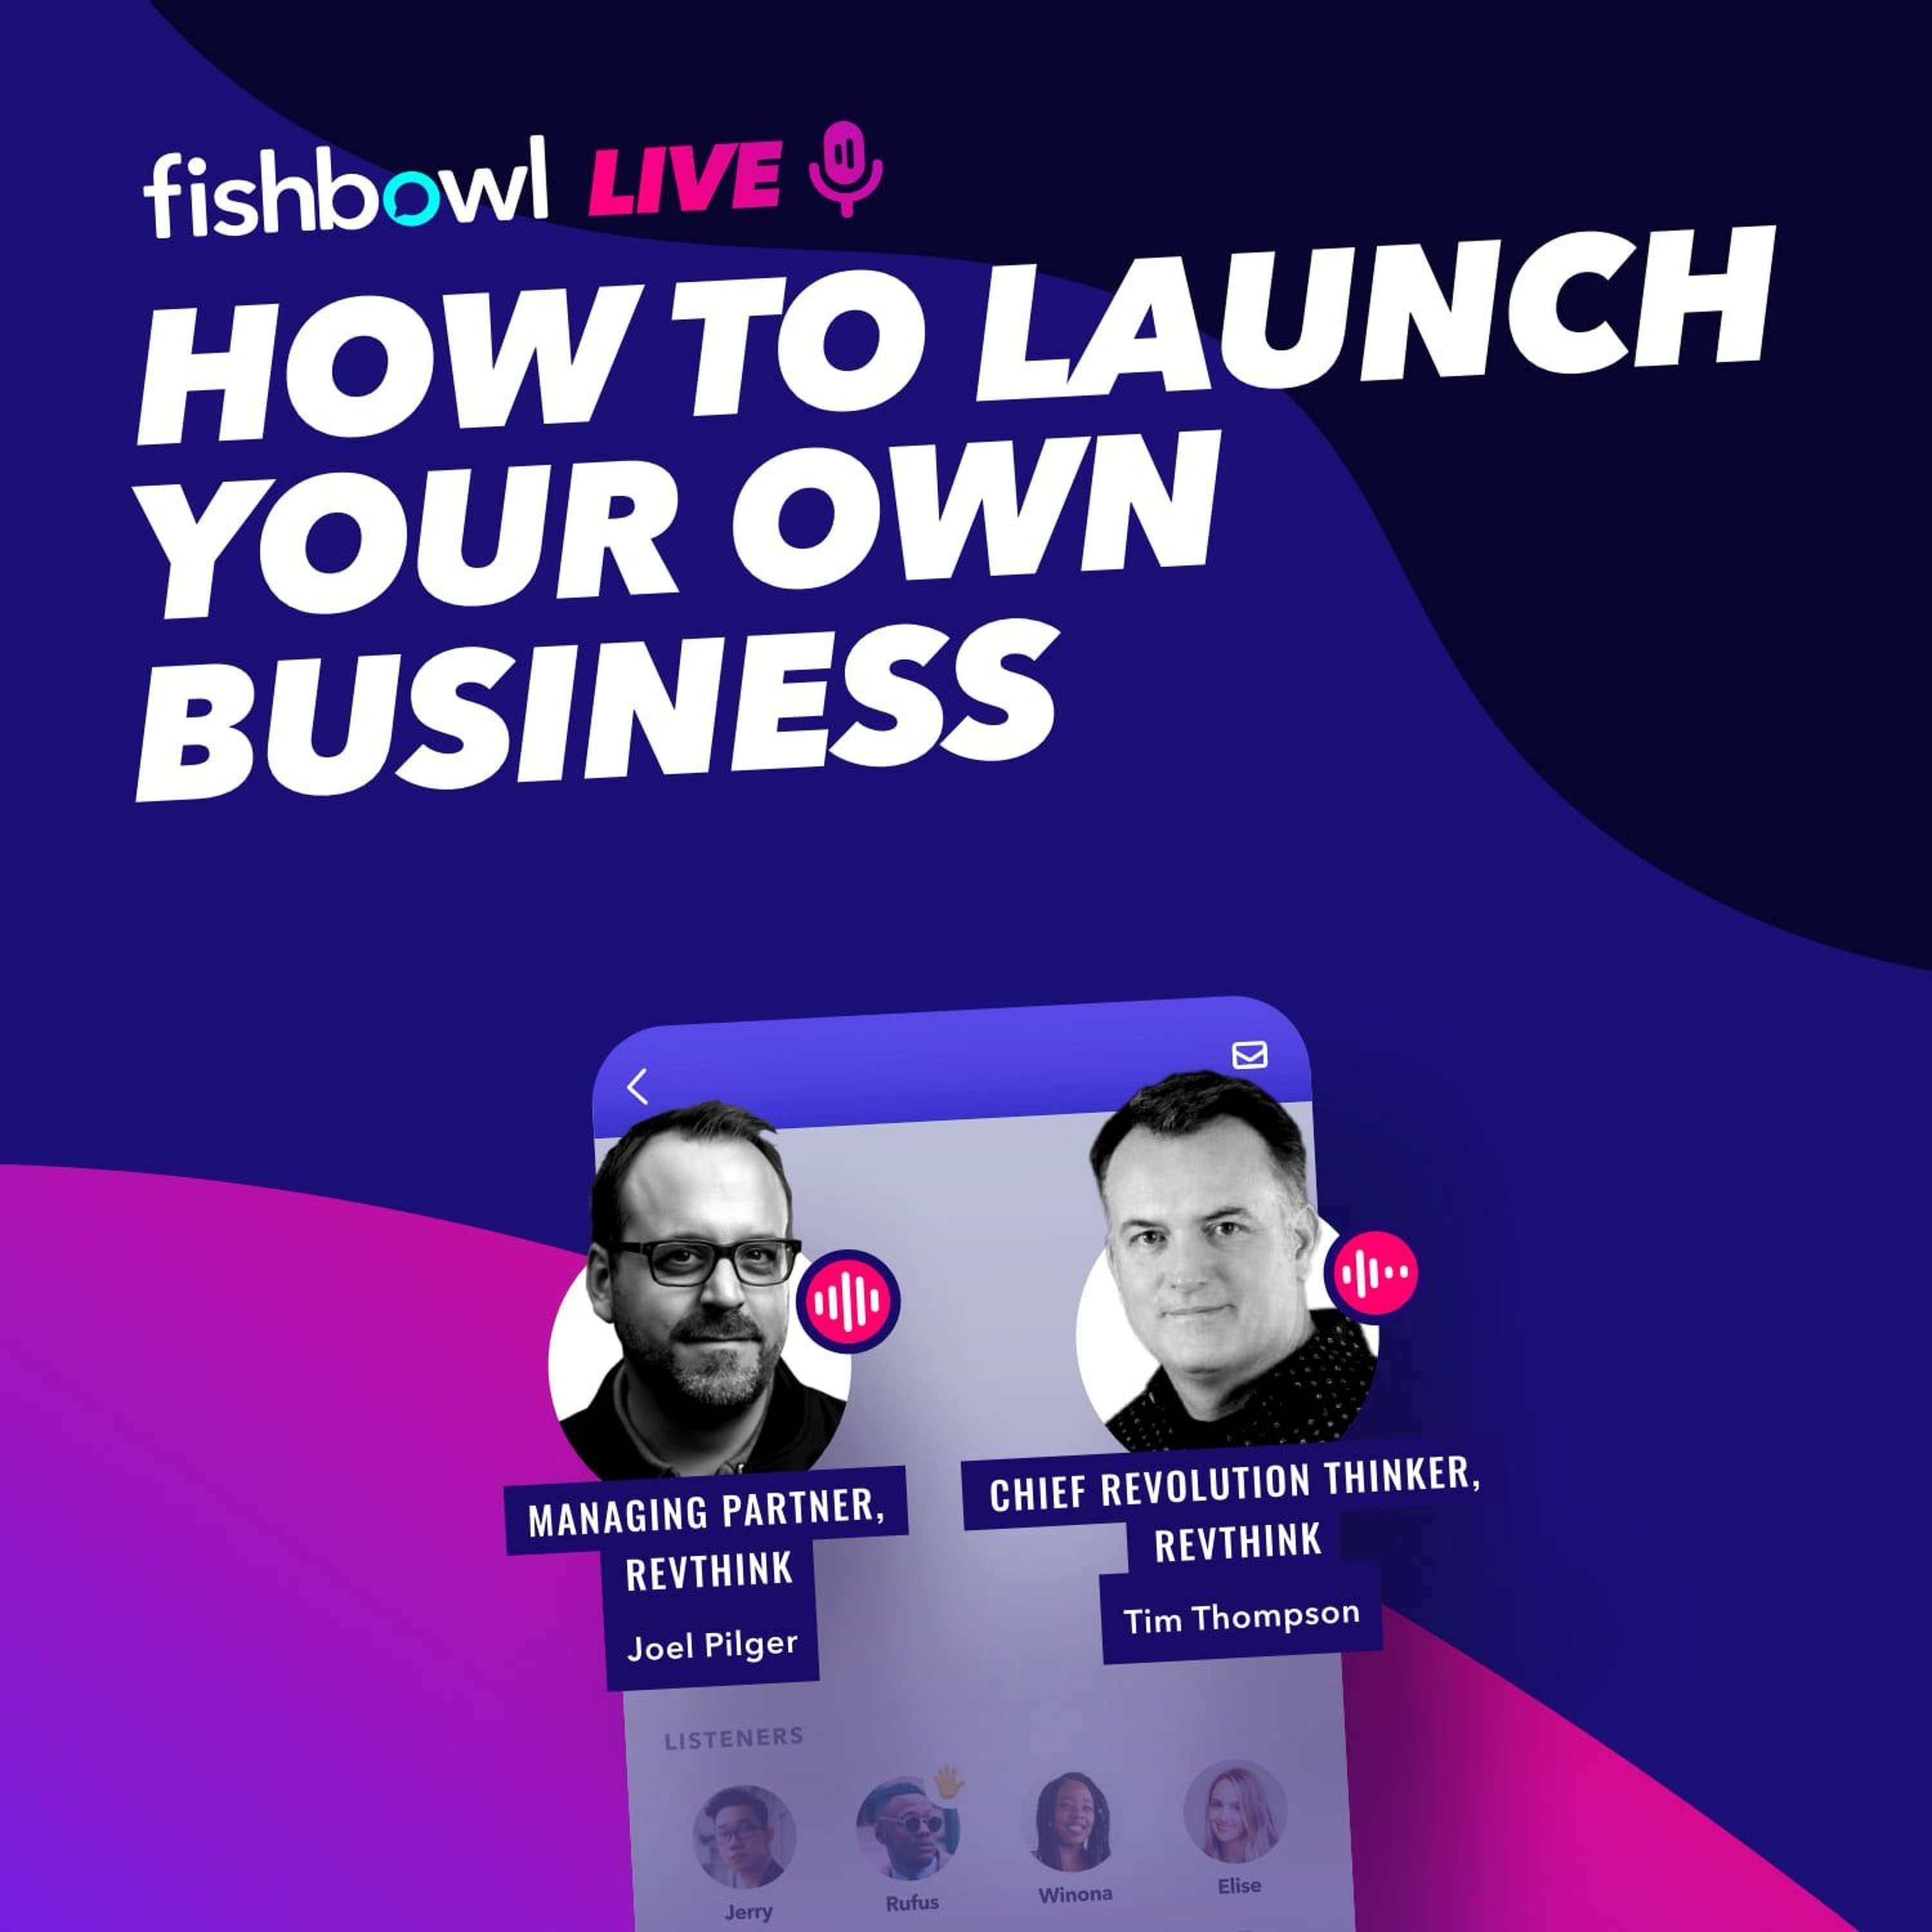 How To Launch Your Own Business (Fishbowl Live)